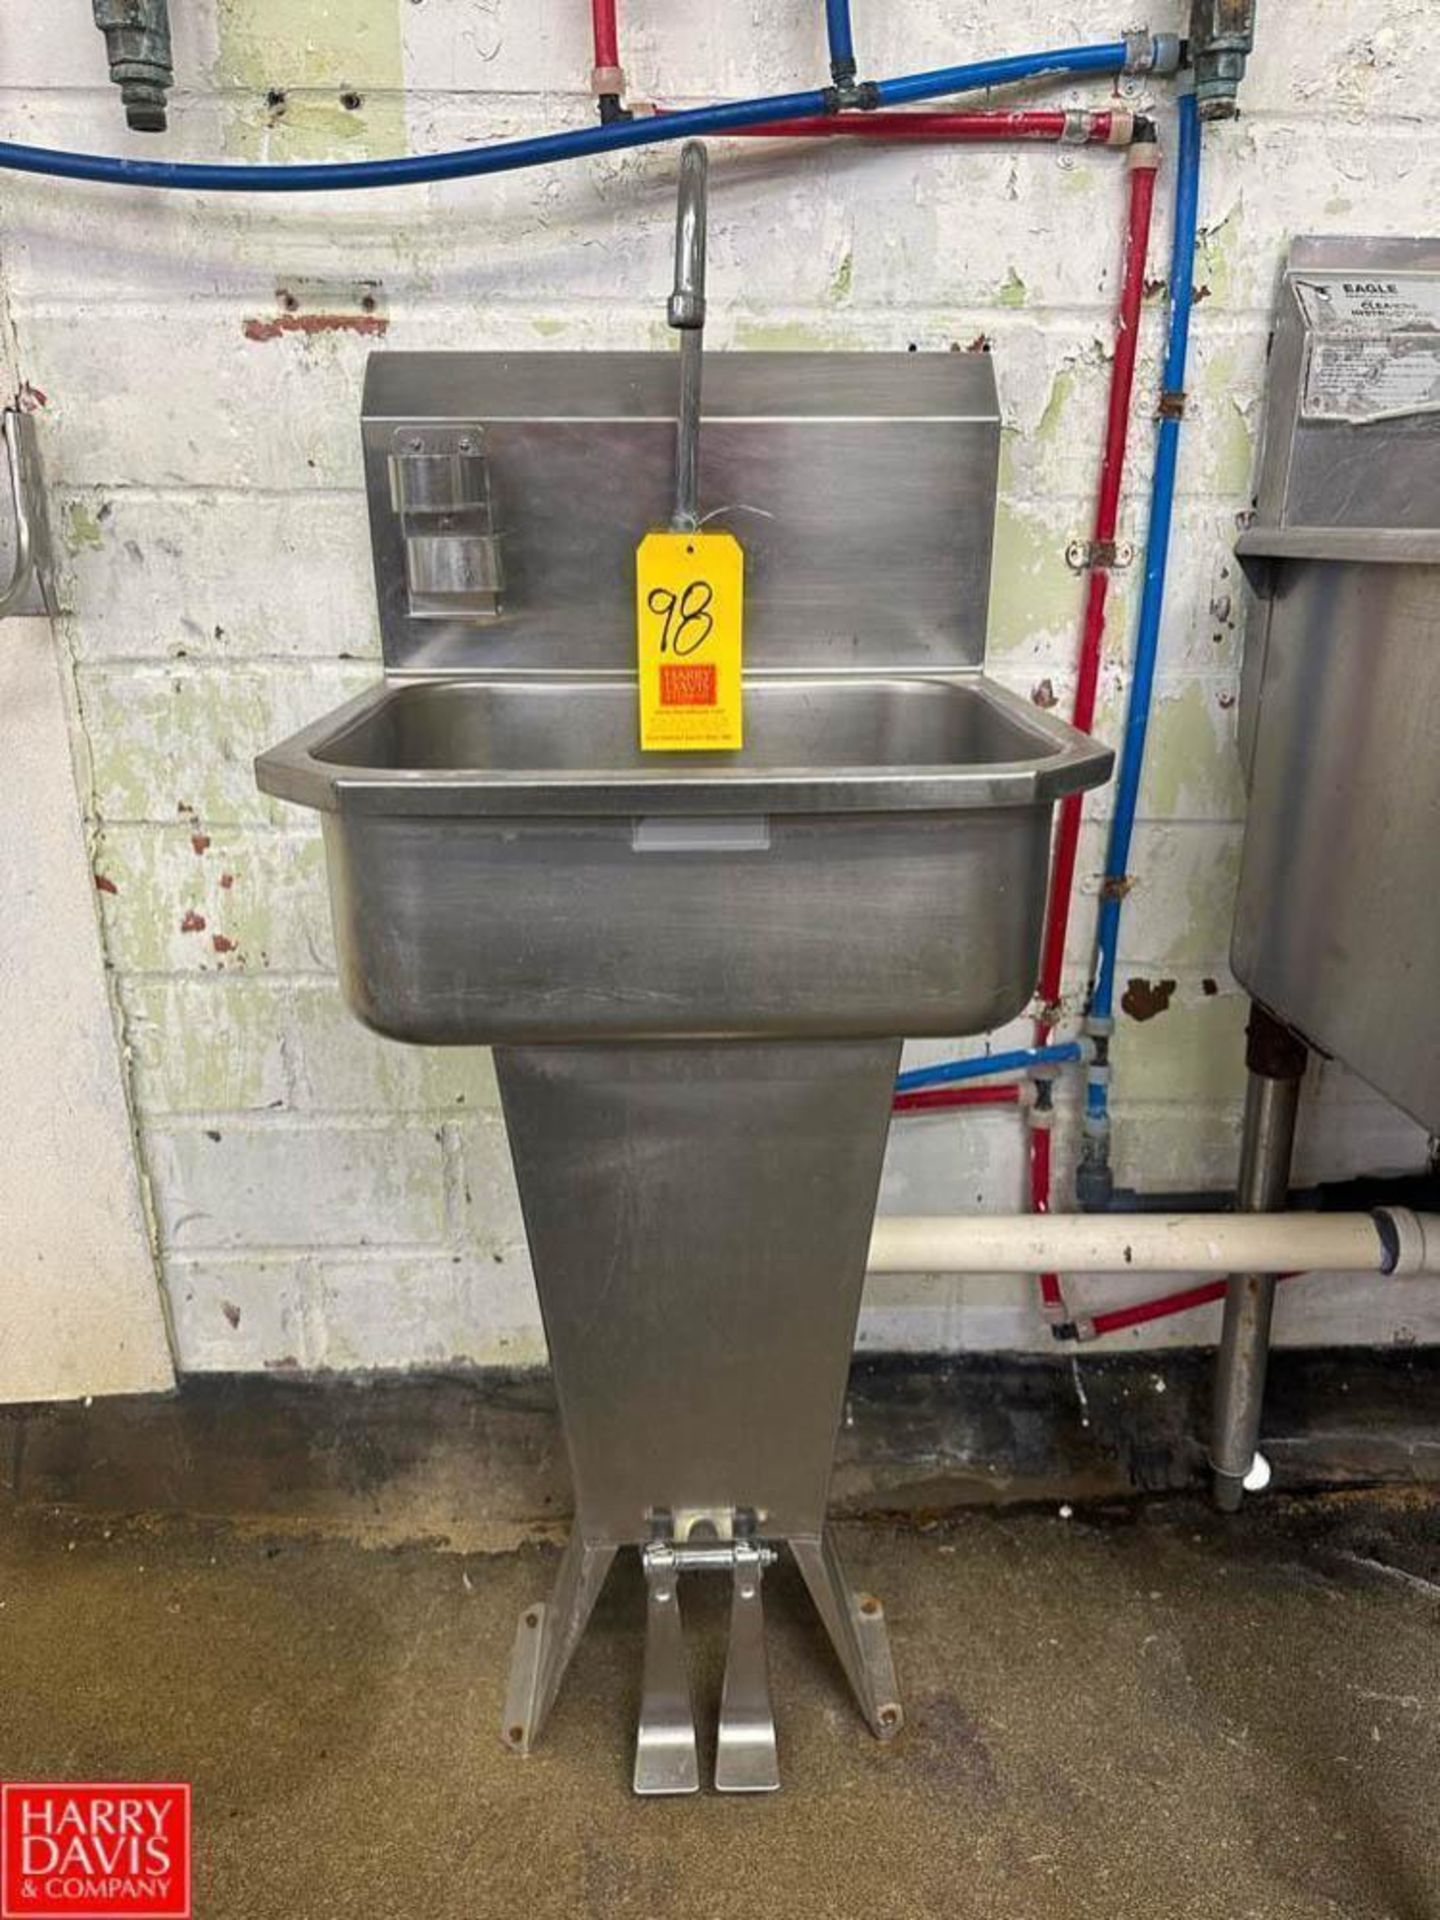 S/S Hand Sink with Foot Controls - Rigging Fee: $85